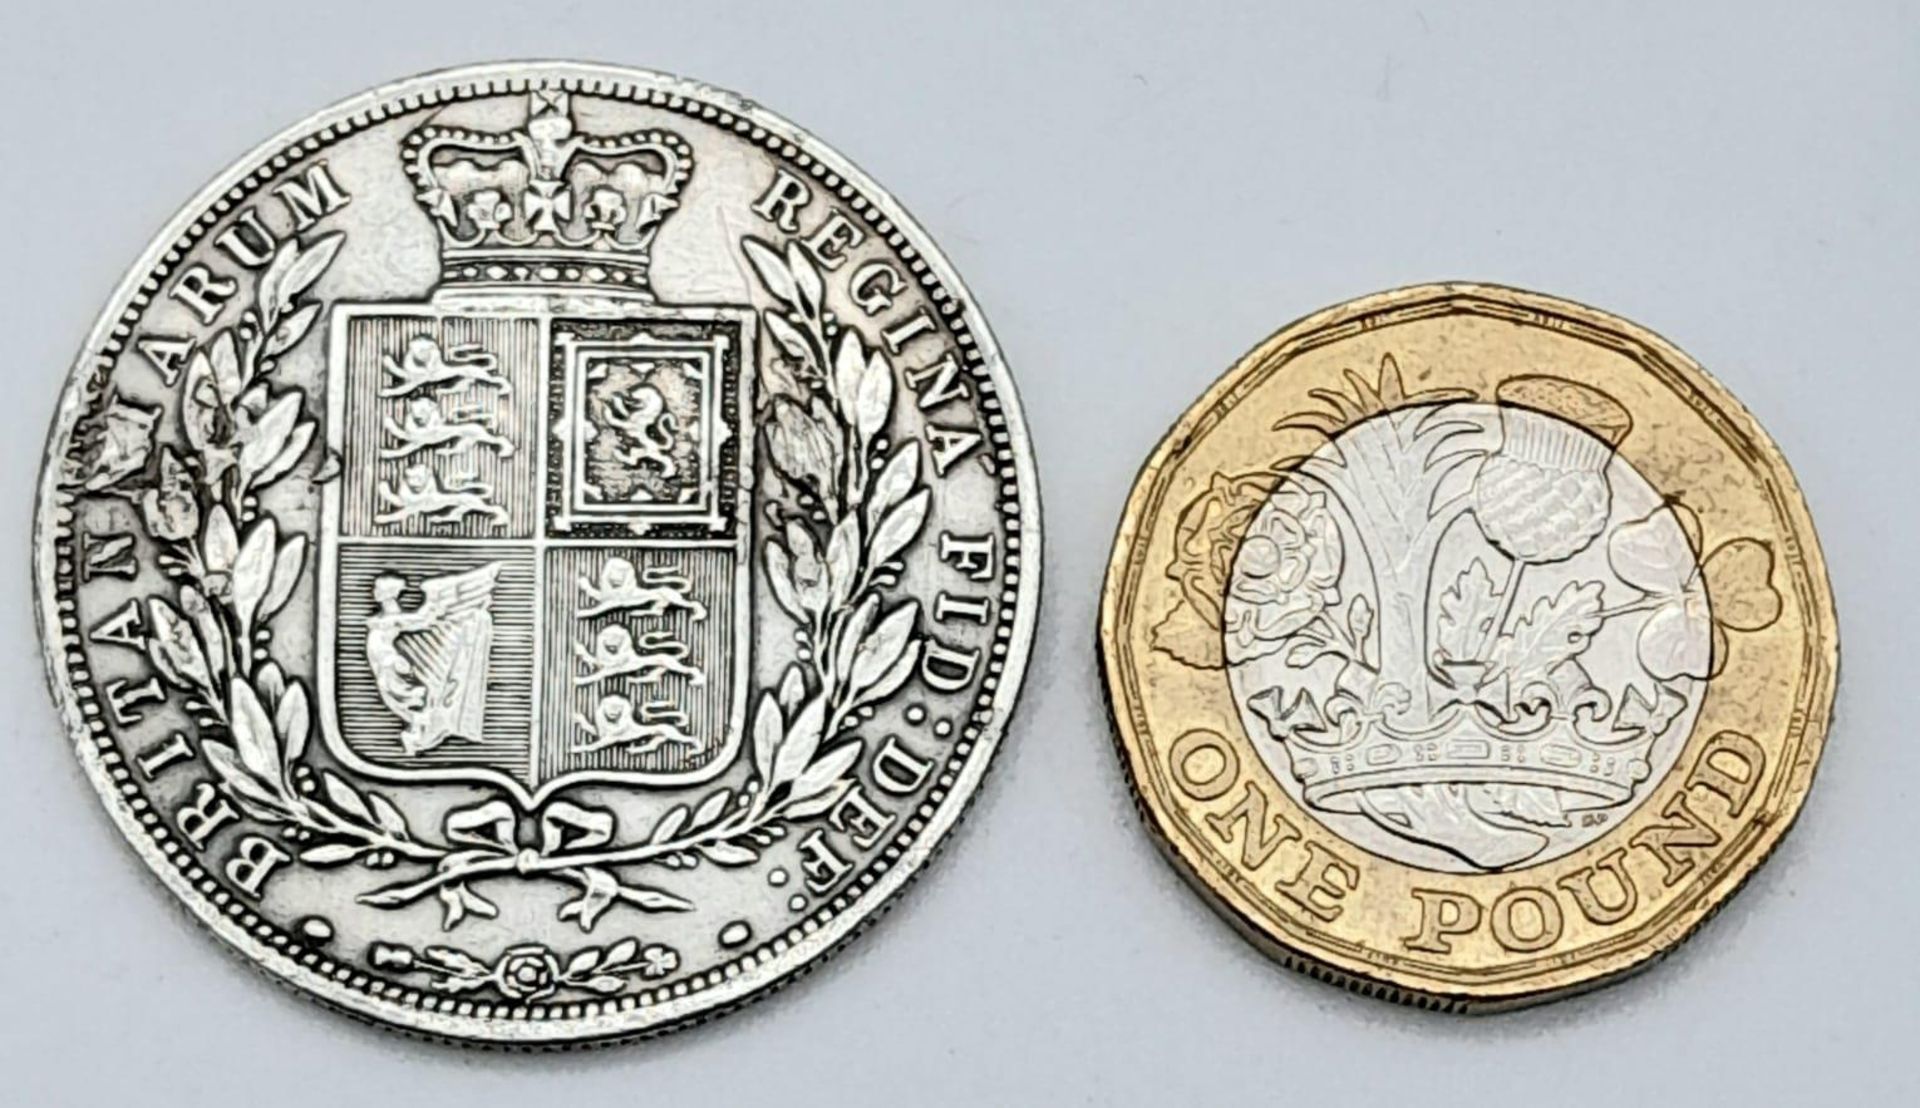 An 1883 Queen Victoria Silver Half Crown. Unfortunately some surface damage on obverse. - Image 2 of 3